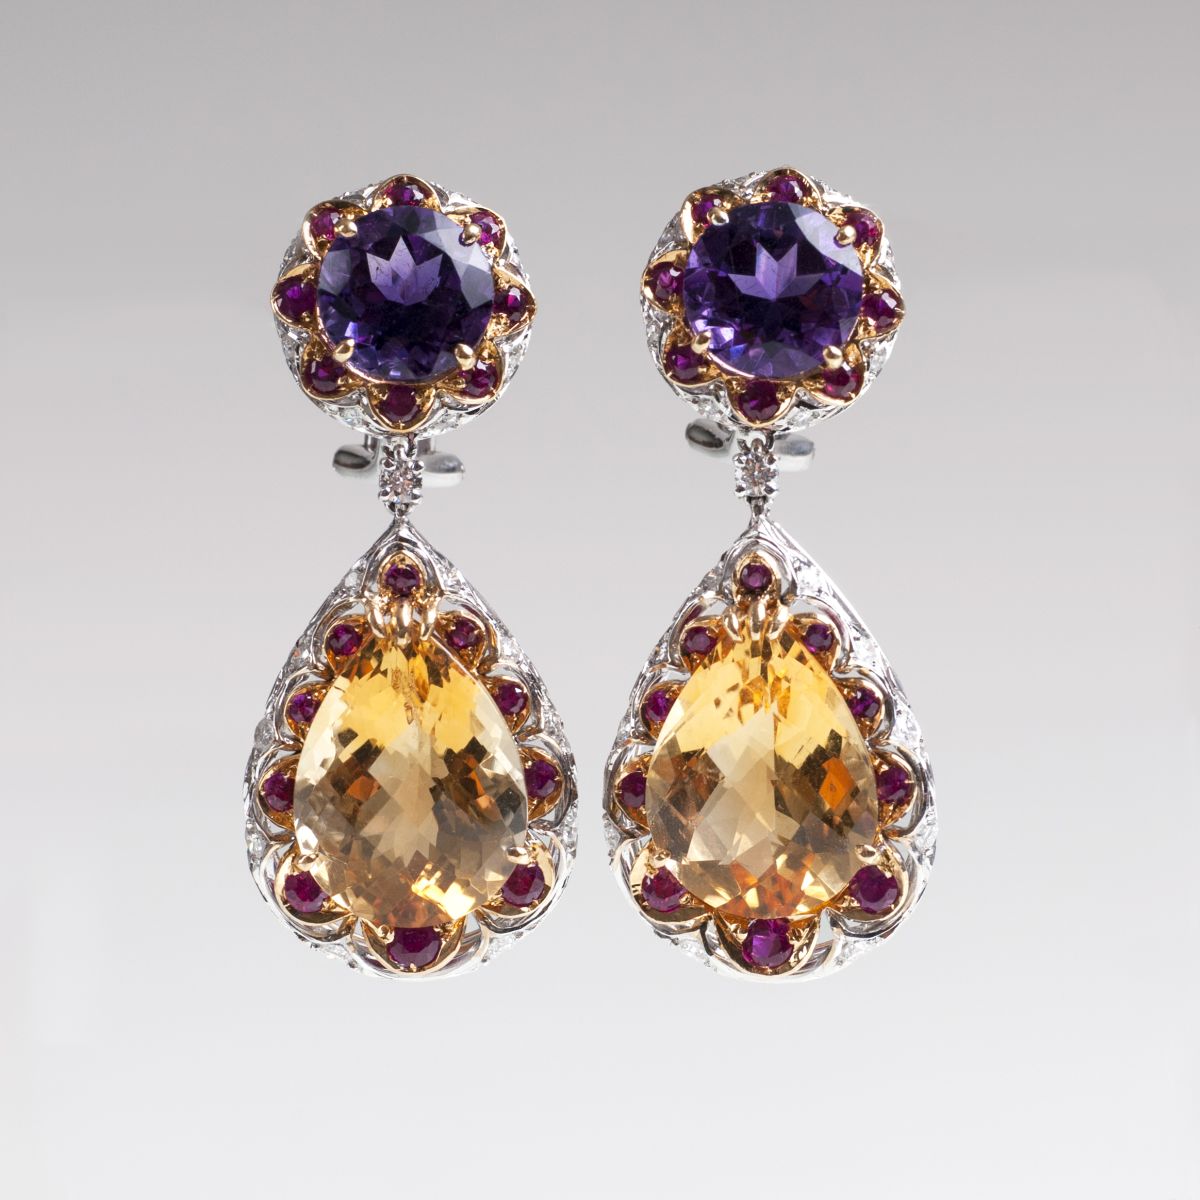 A pair of amethyst citrine earpendants with rubies and diamonds